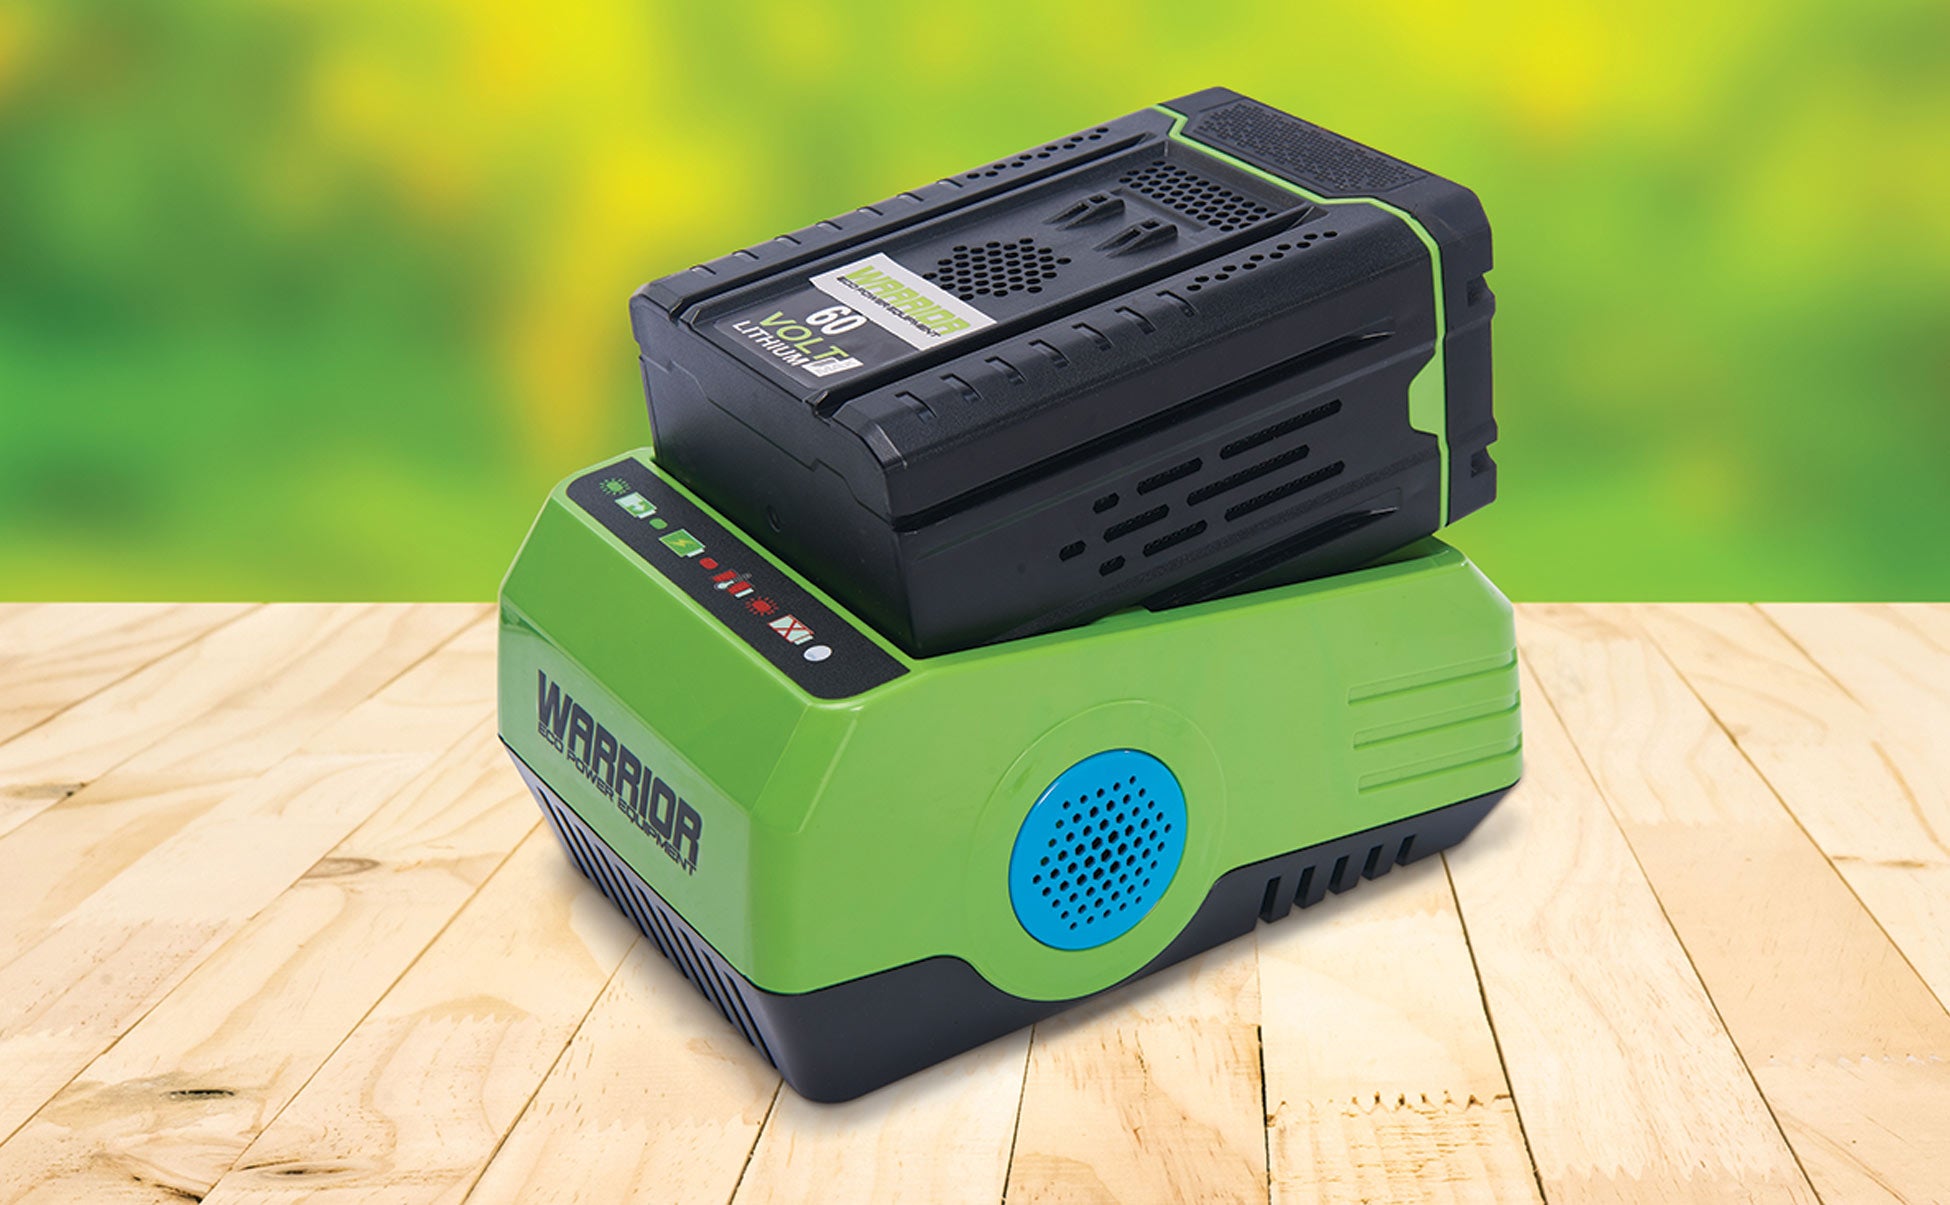 Warrior Eco Power Equipment charger with battery in use